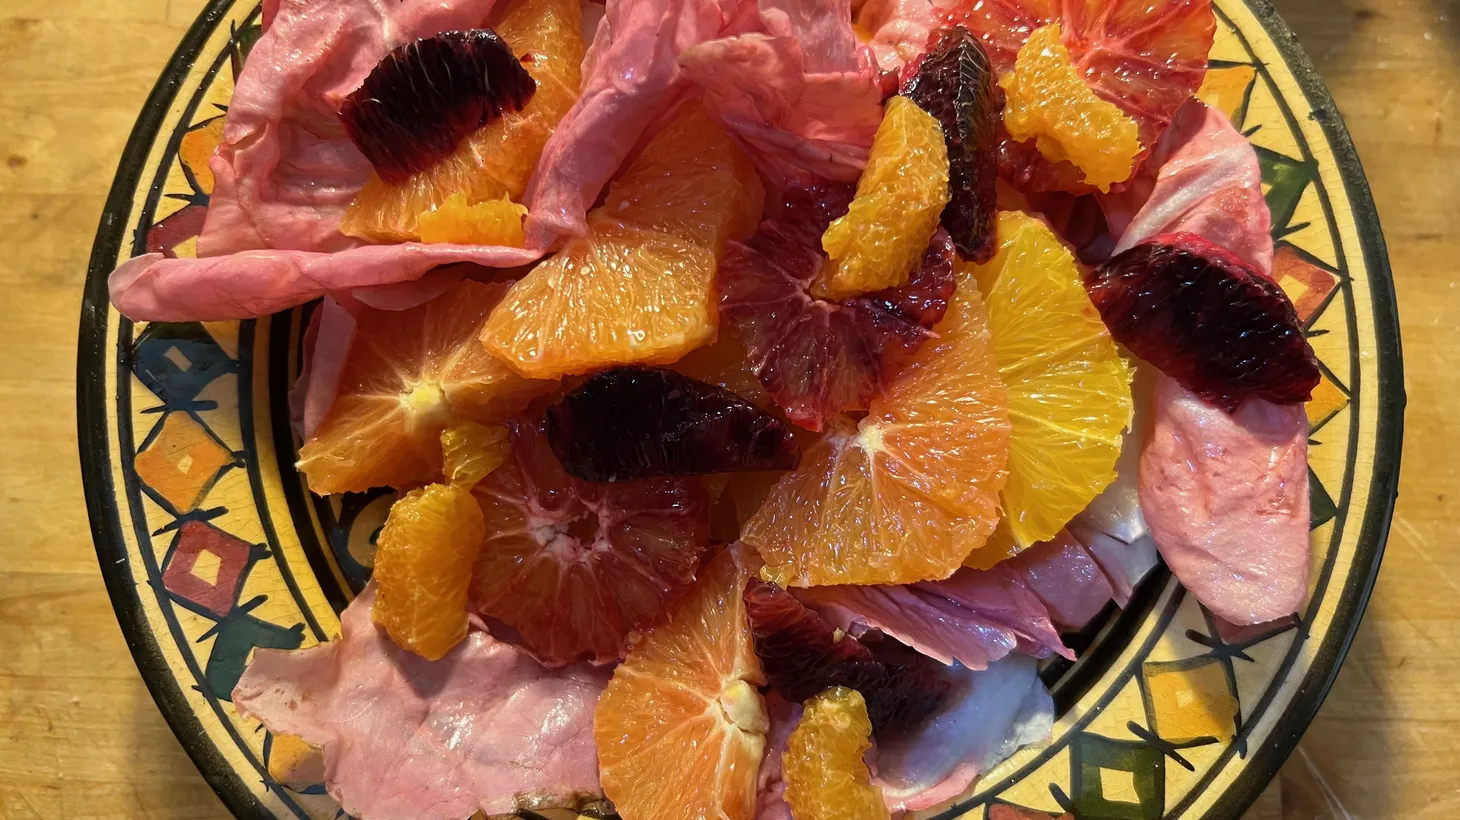 Evan’s Winter Citrus Salad is a love letter to the season.